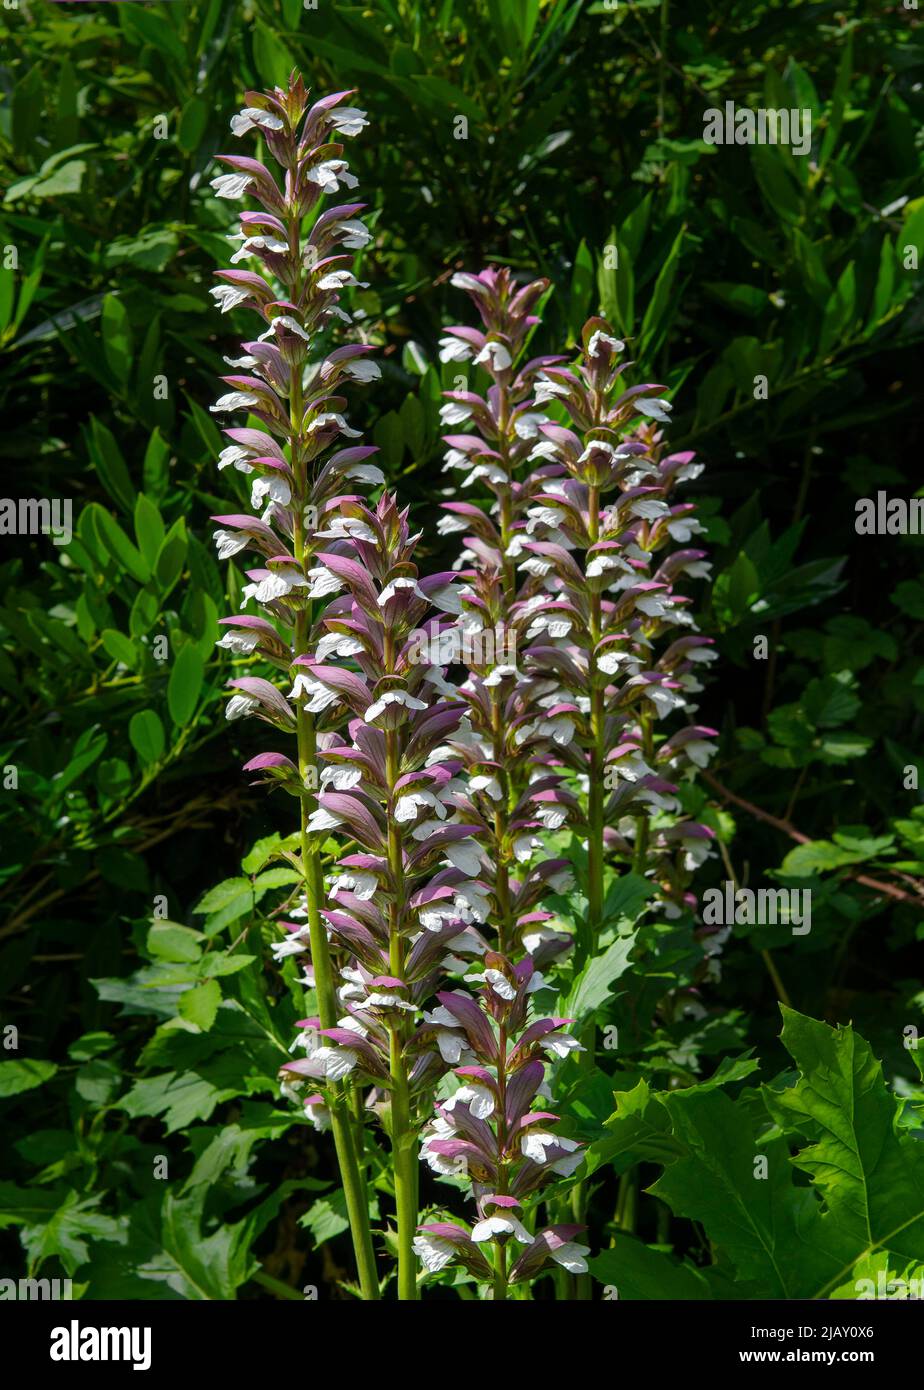 Acanthus mollis, commonly known as bear's breeches, sea dock, bear's foot, sea holly, gator plant or oyster plant, Stock Photo